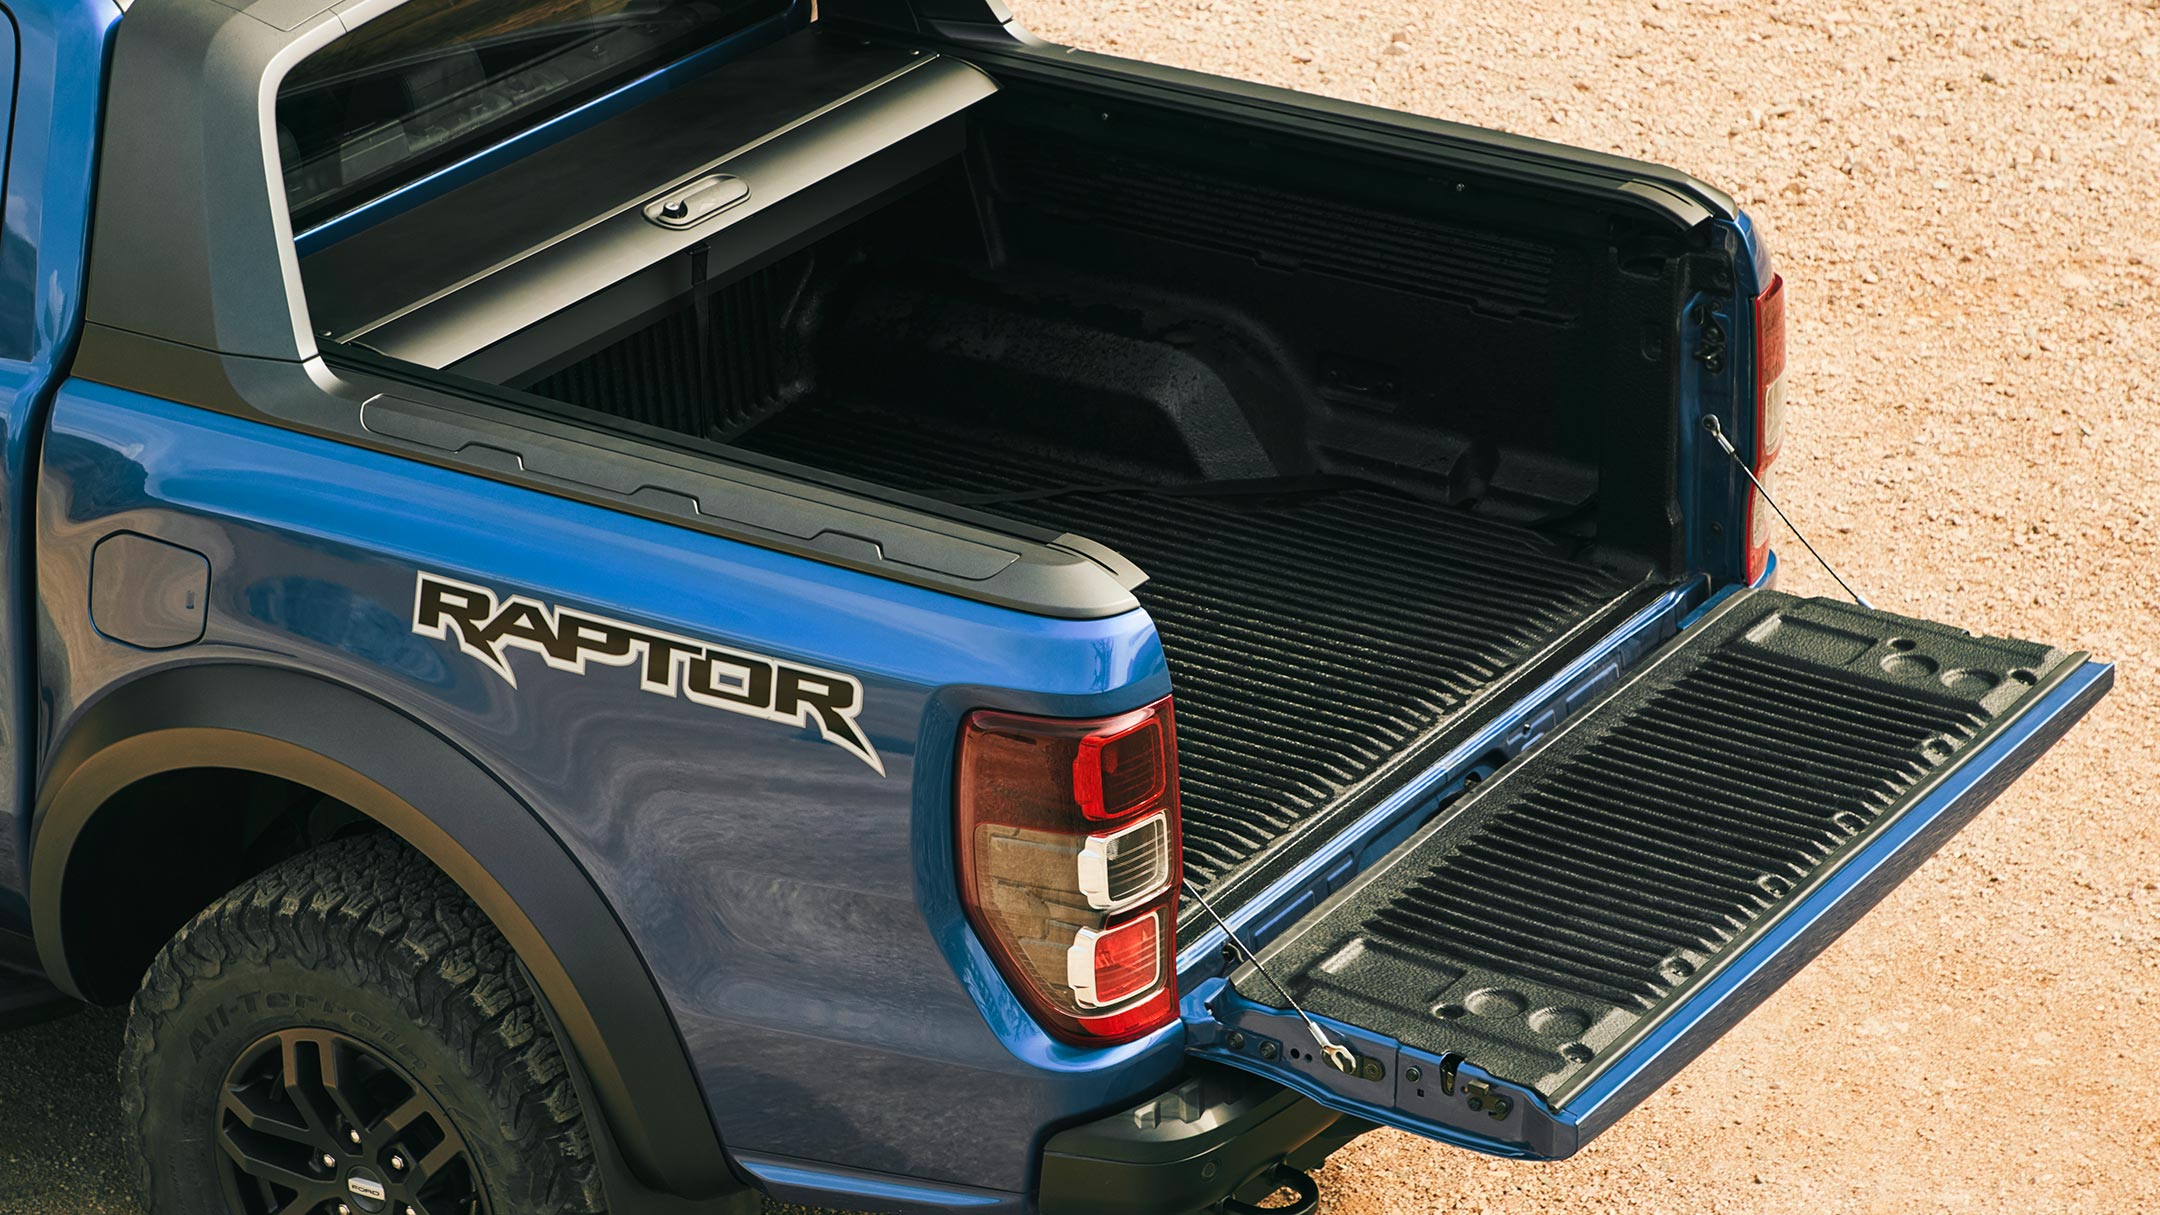 Ford Ranger Raptor showing ope easy lift tailgate